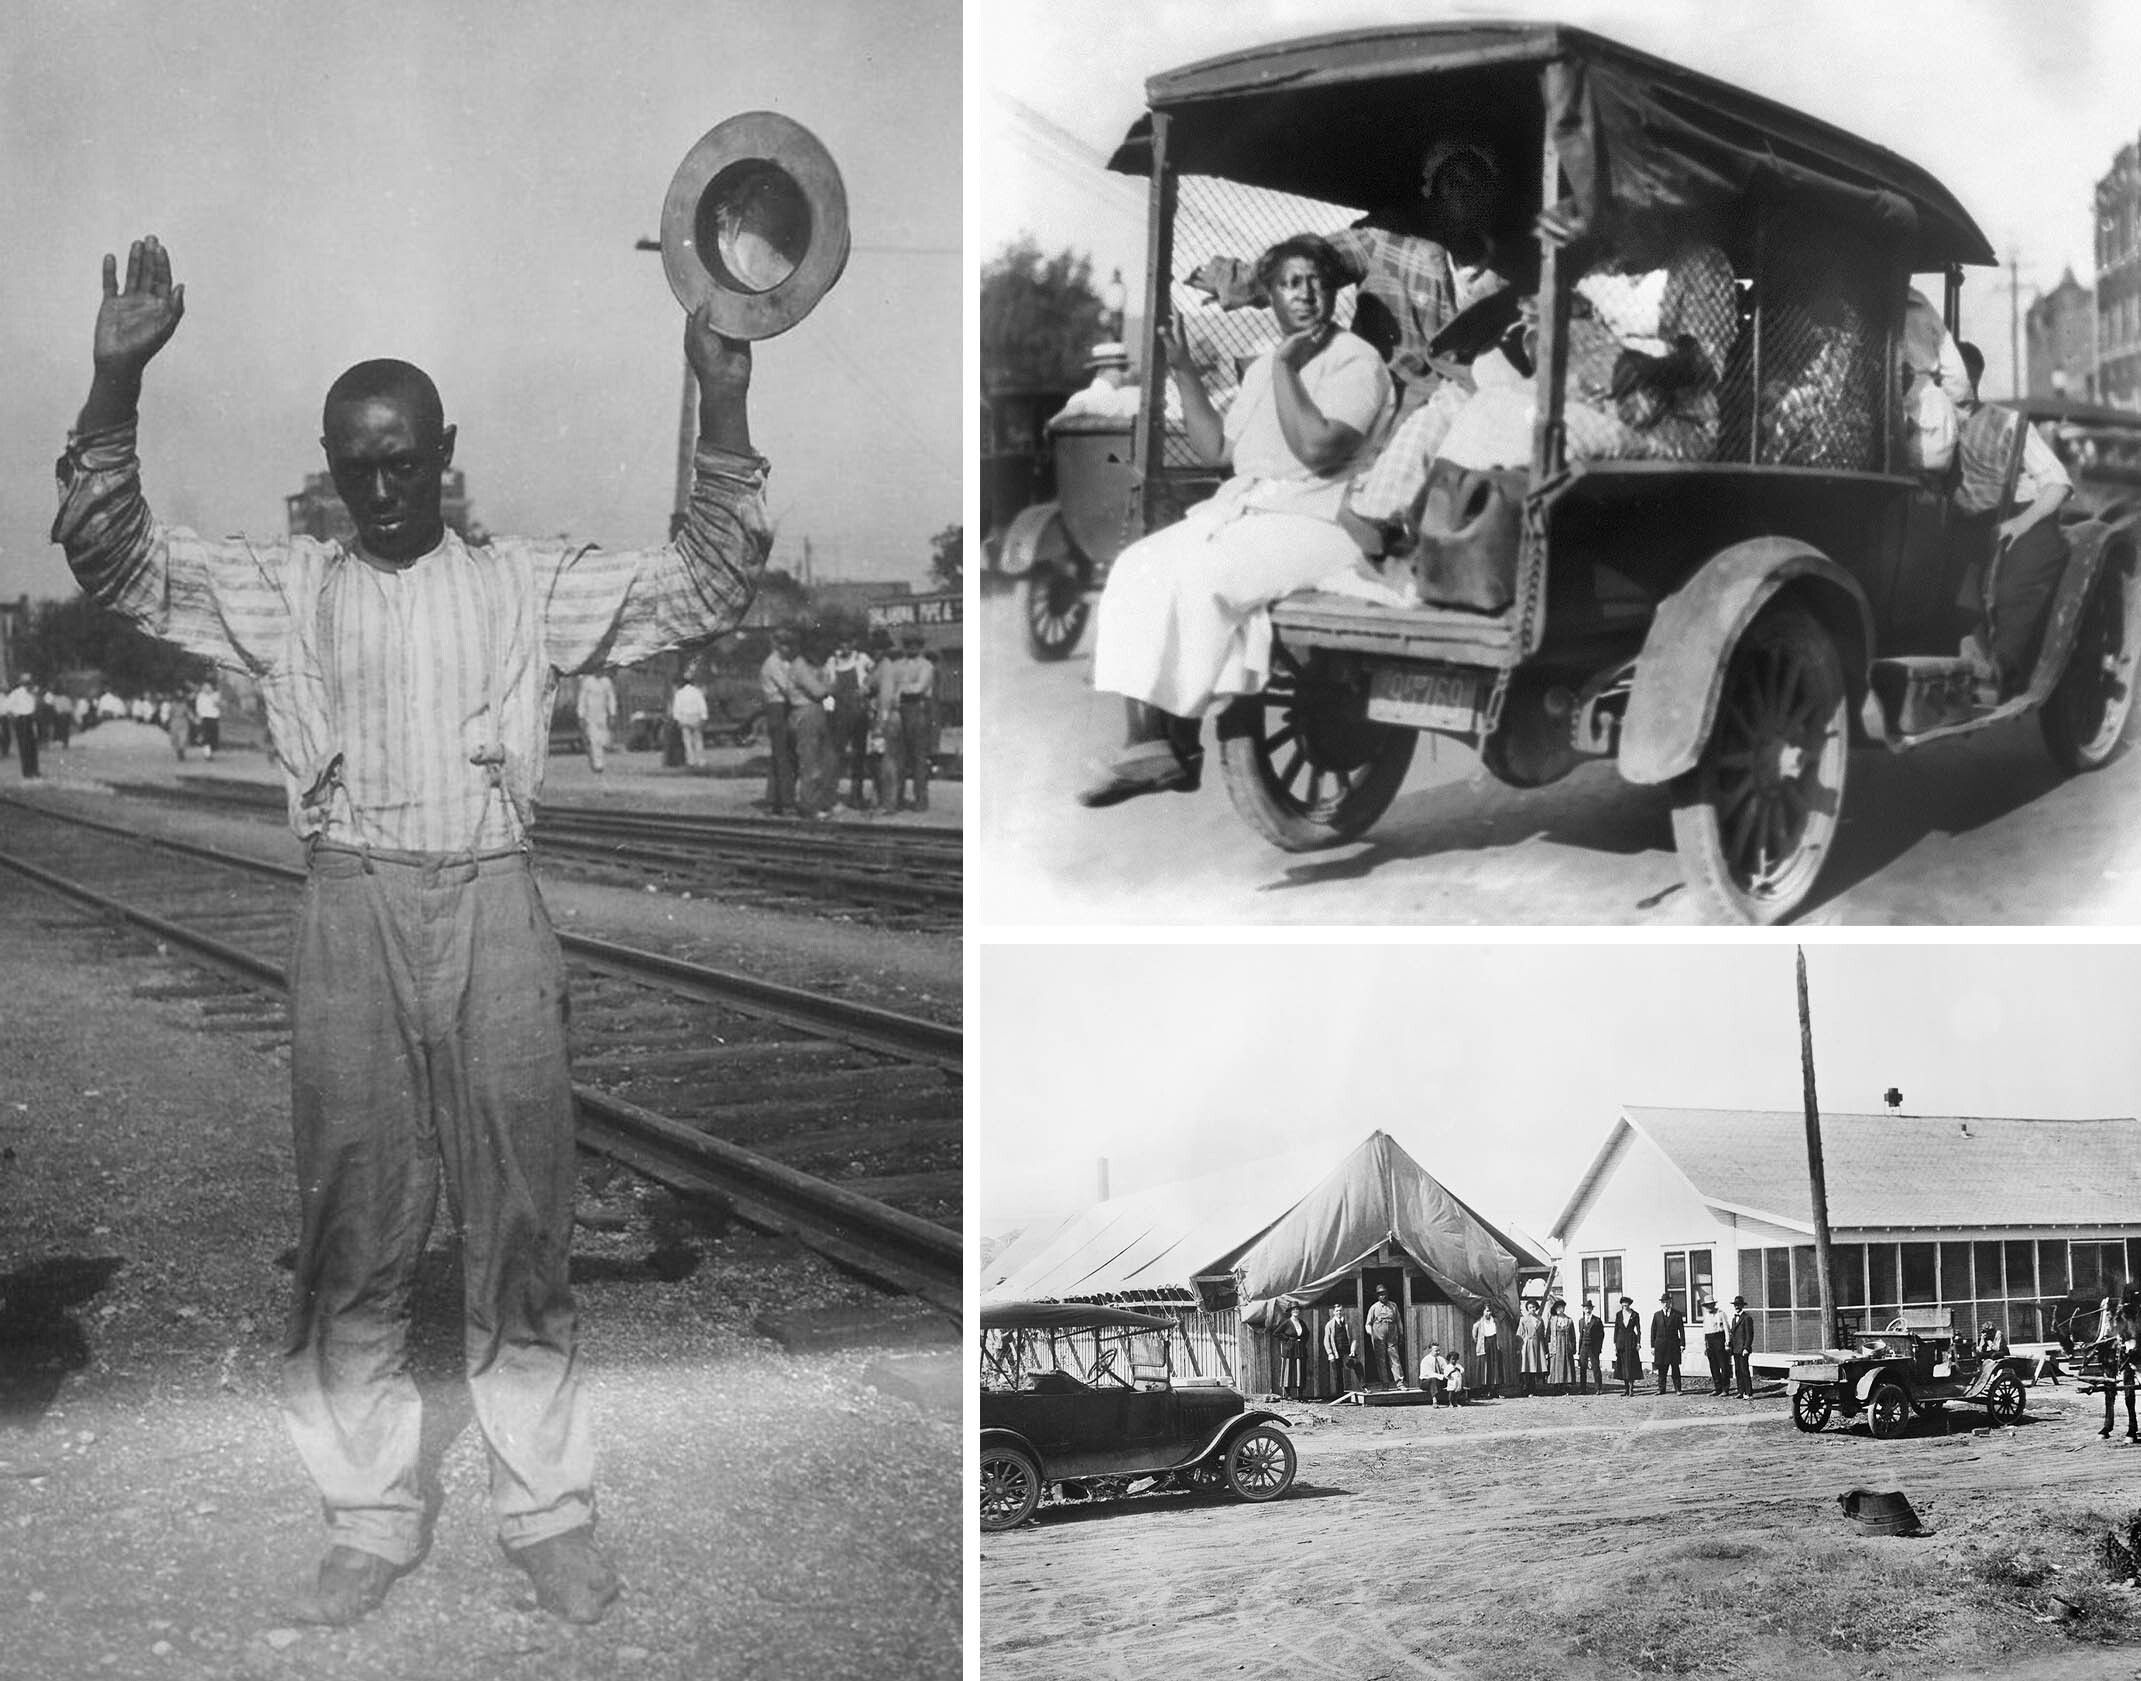 Left: A man with his hands up surrenders during the Tulsa race massacre. Top right: A truck carries African Americans during the massacre. Bottom right: The American Red Cross headquarters and hospital in Tulsa in November 1921. Credit: Getty Images.